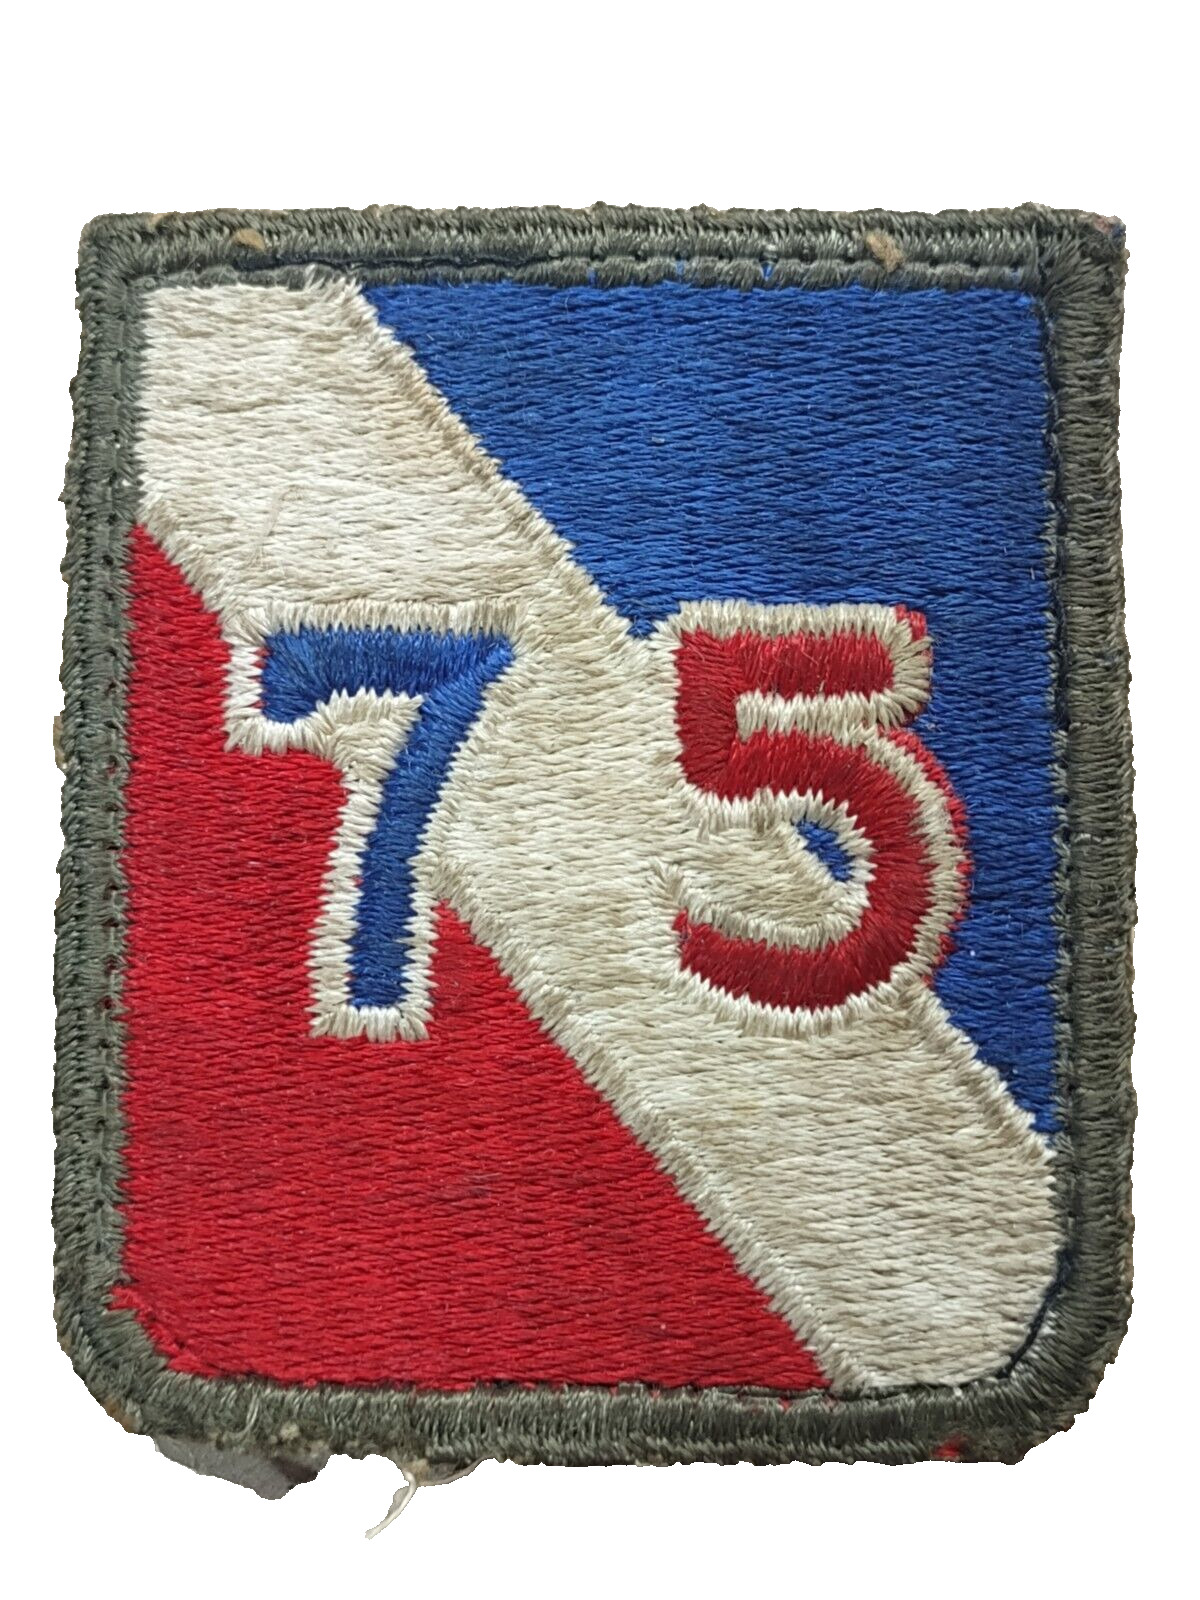 Vintage WW2 United States Army 75th Infantry Division, Class-A Unit Patch